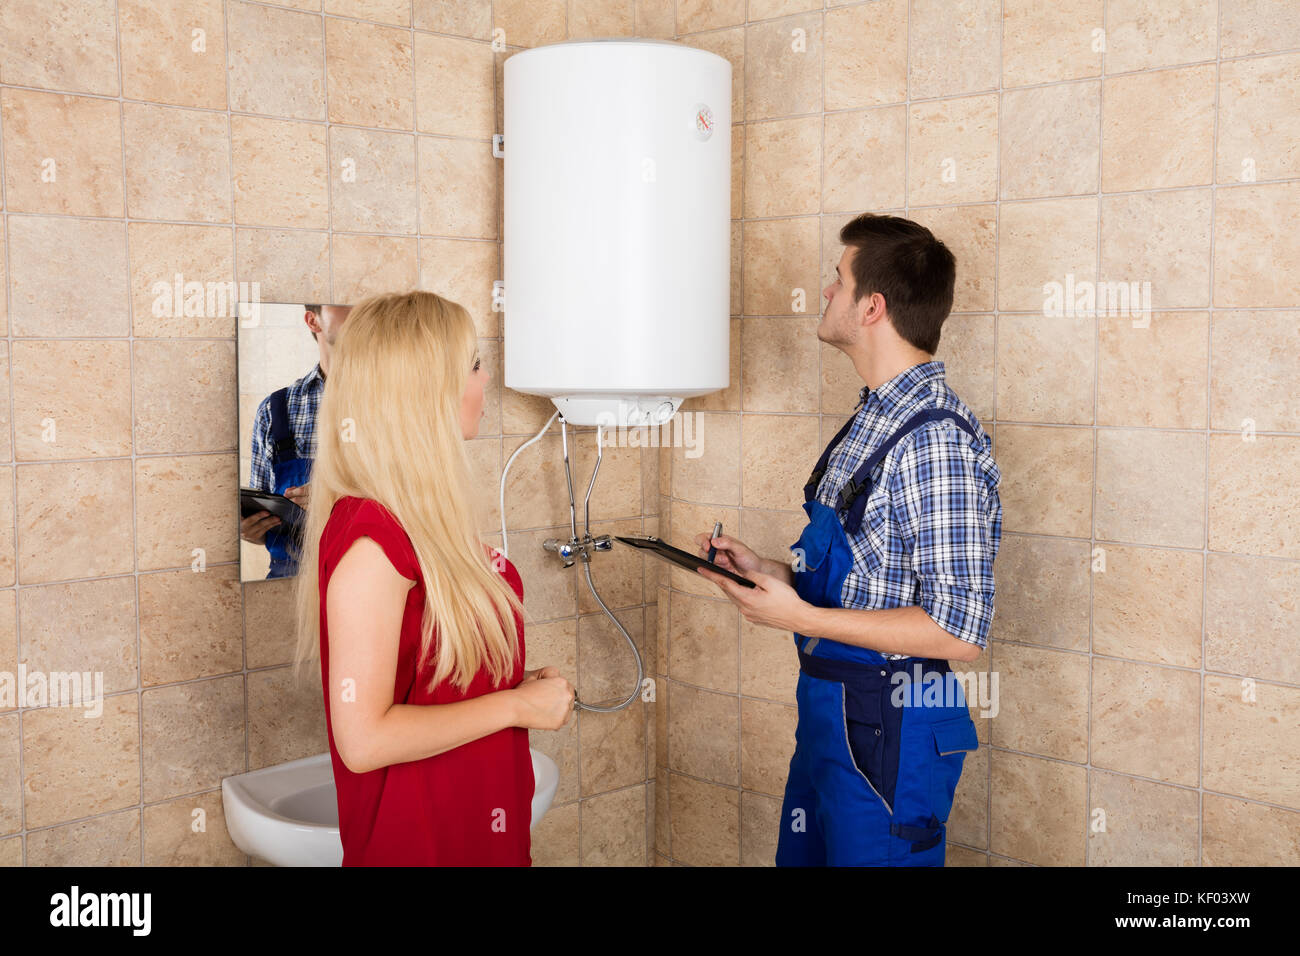 Woman Looking At Young Male Plumber Holding Clipboard Looking At Electric Boiler Stock Photo